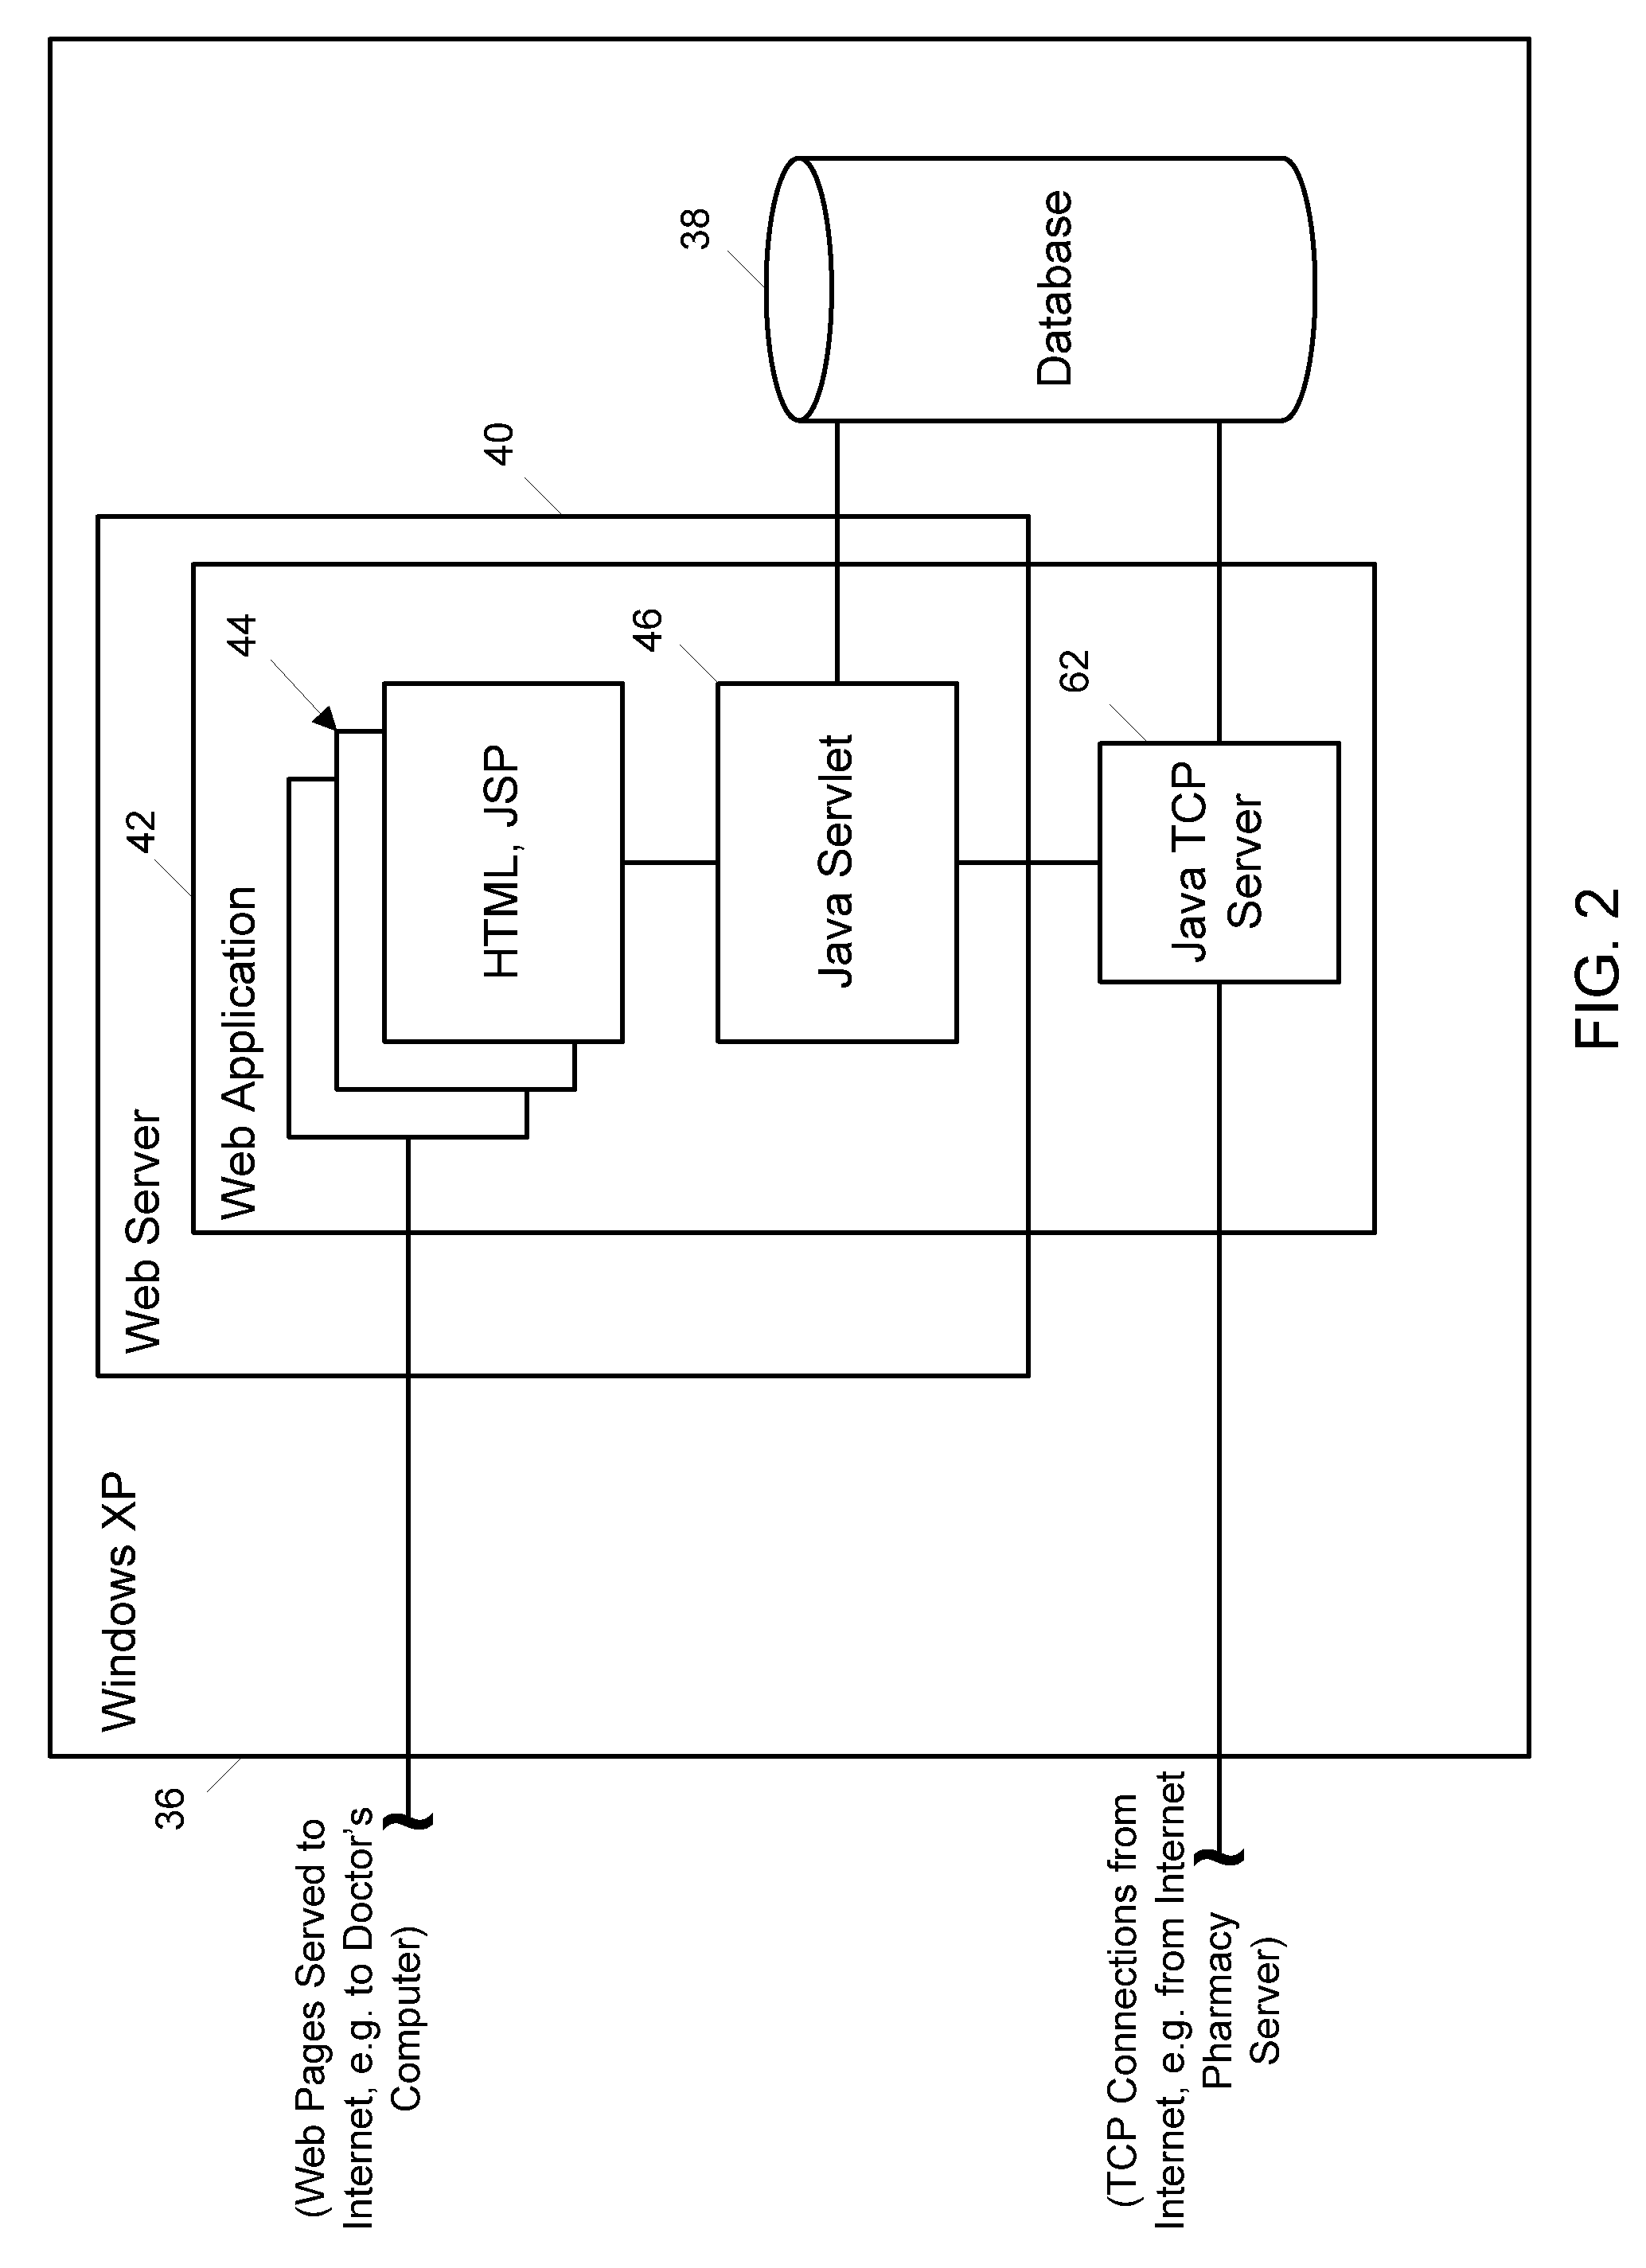 Electronic prescription system for internet pharmacies and method threfor